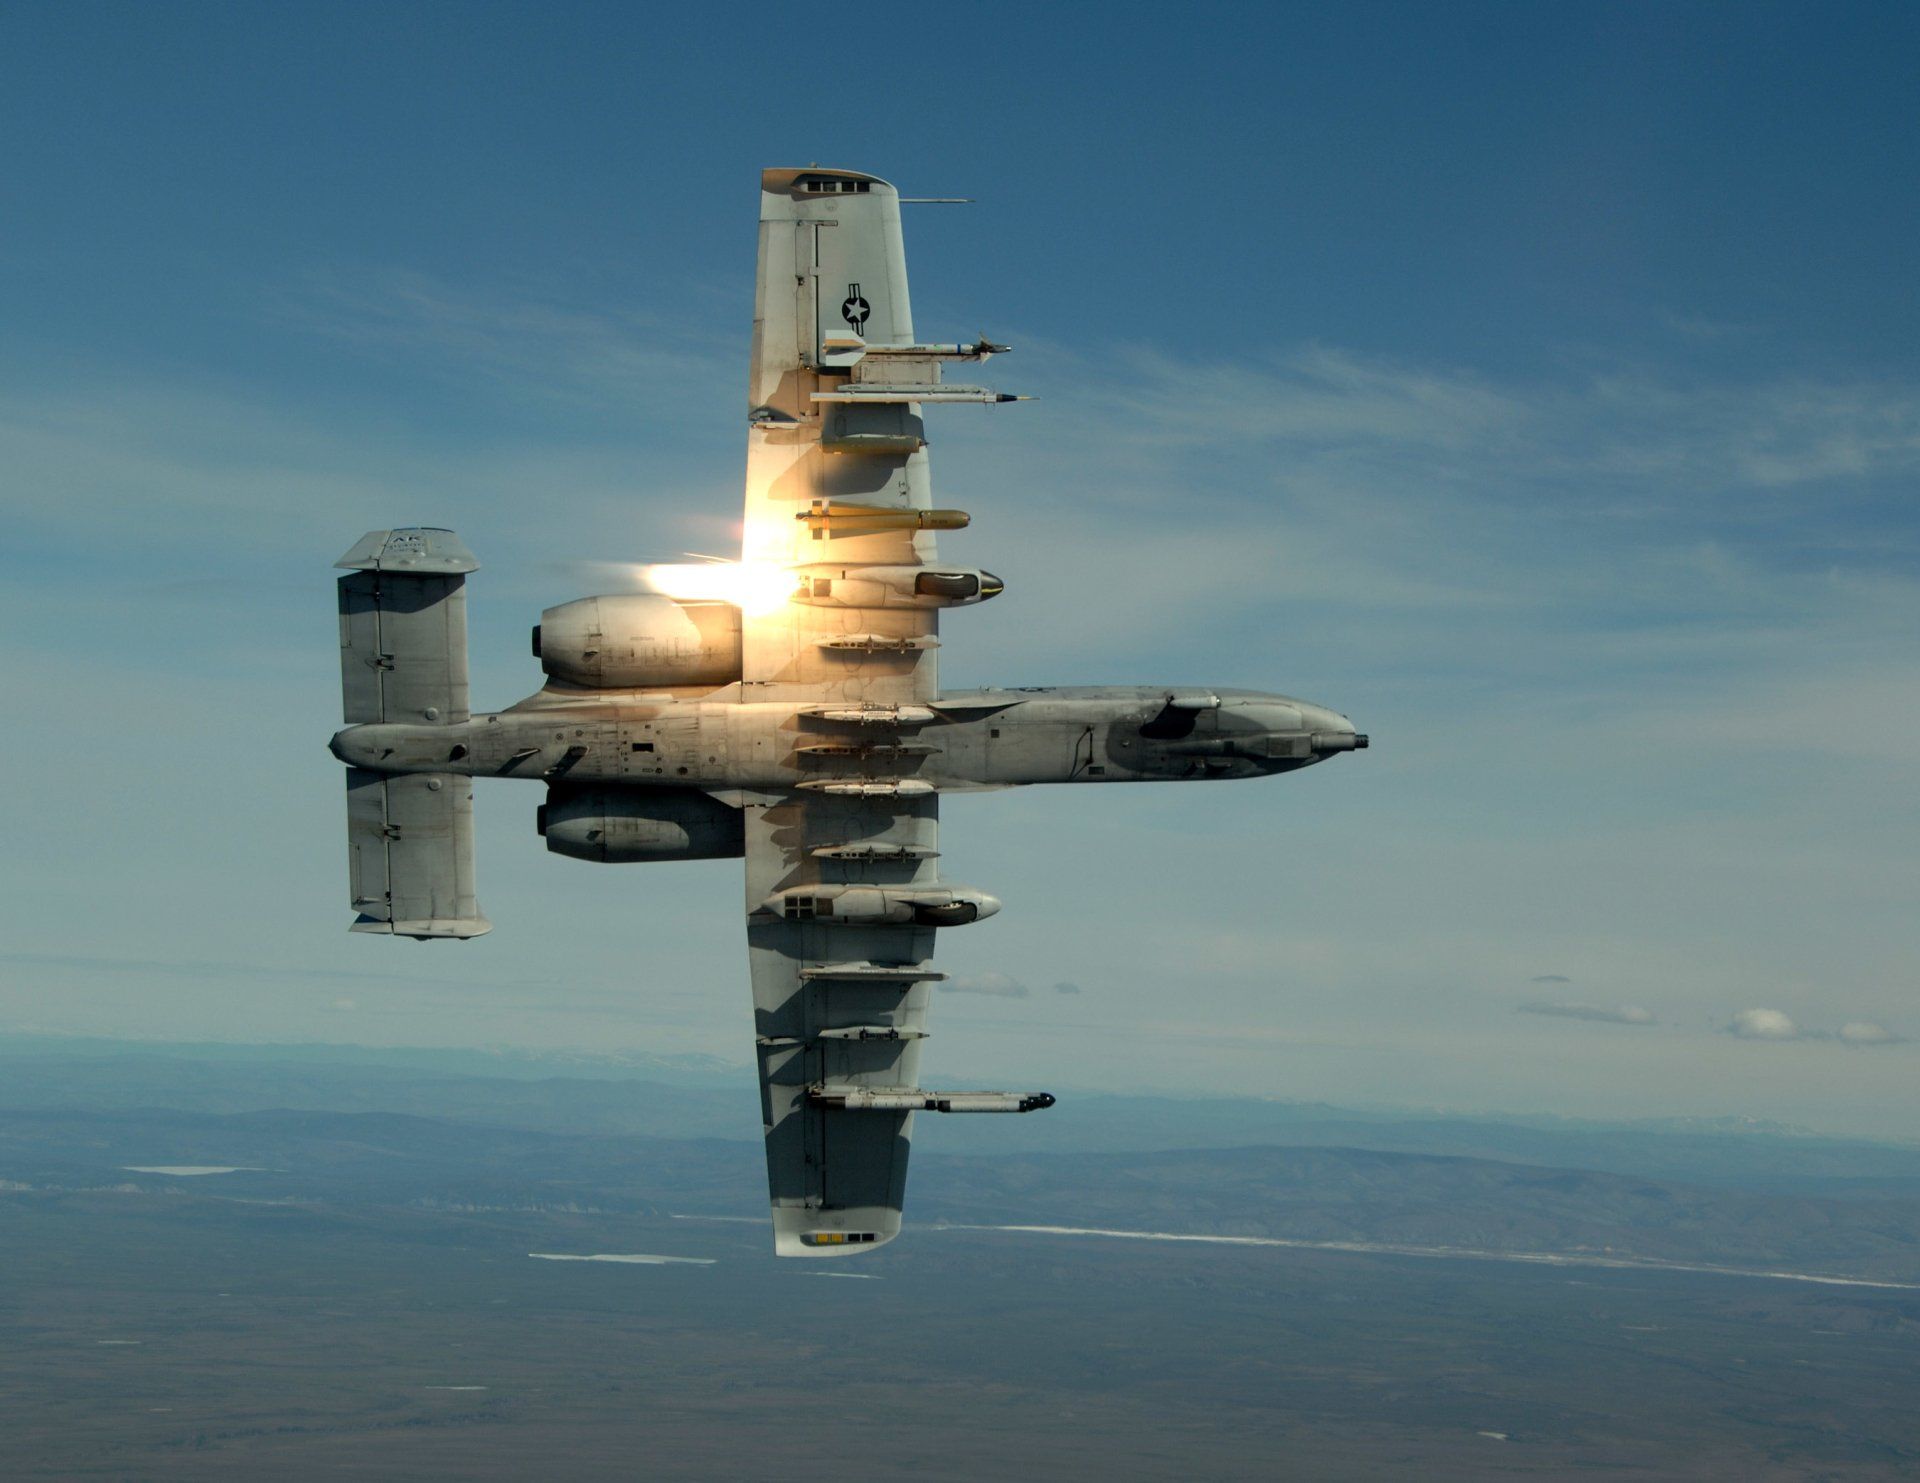 Fairchild Republic A 10 Thunderbolt II HD Wallpaper And Background Image